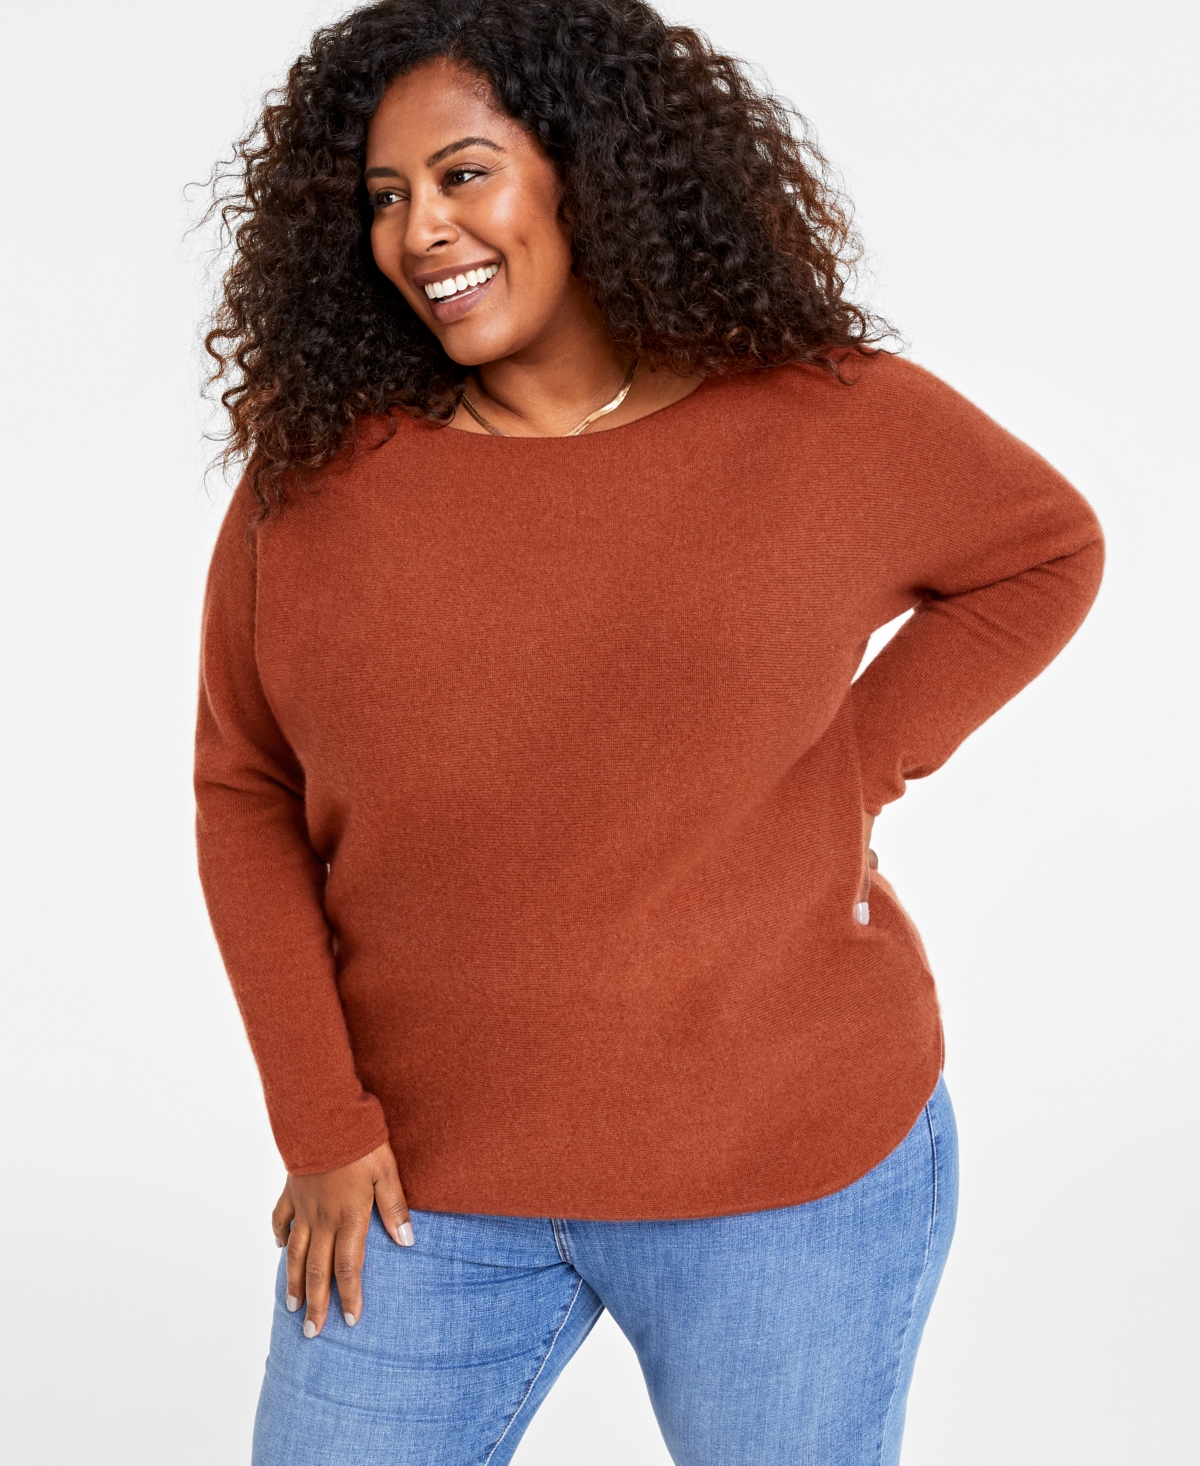 Plus Size 100% Cashmere Shirttail Sweater, Created for Macy's - Bronze Pecan